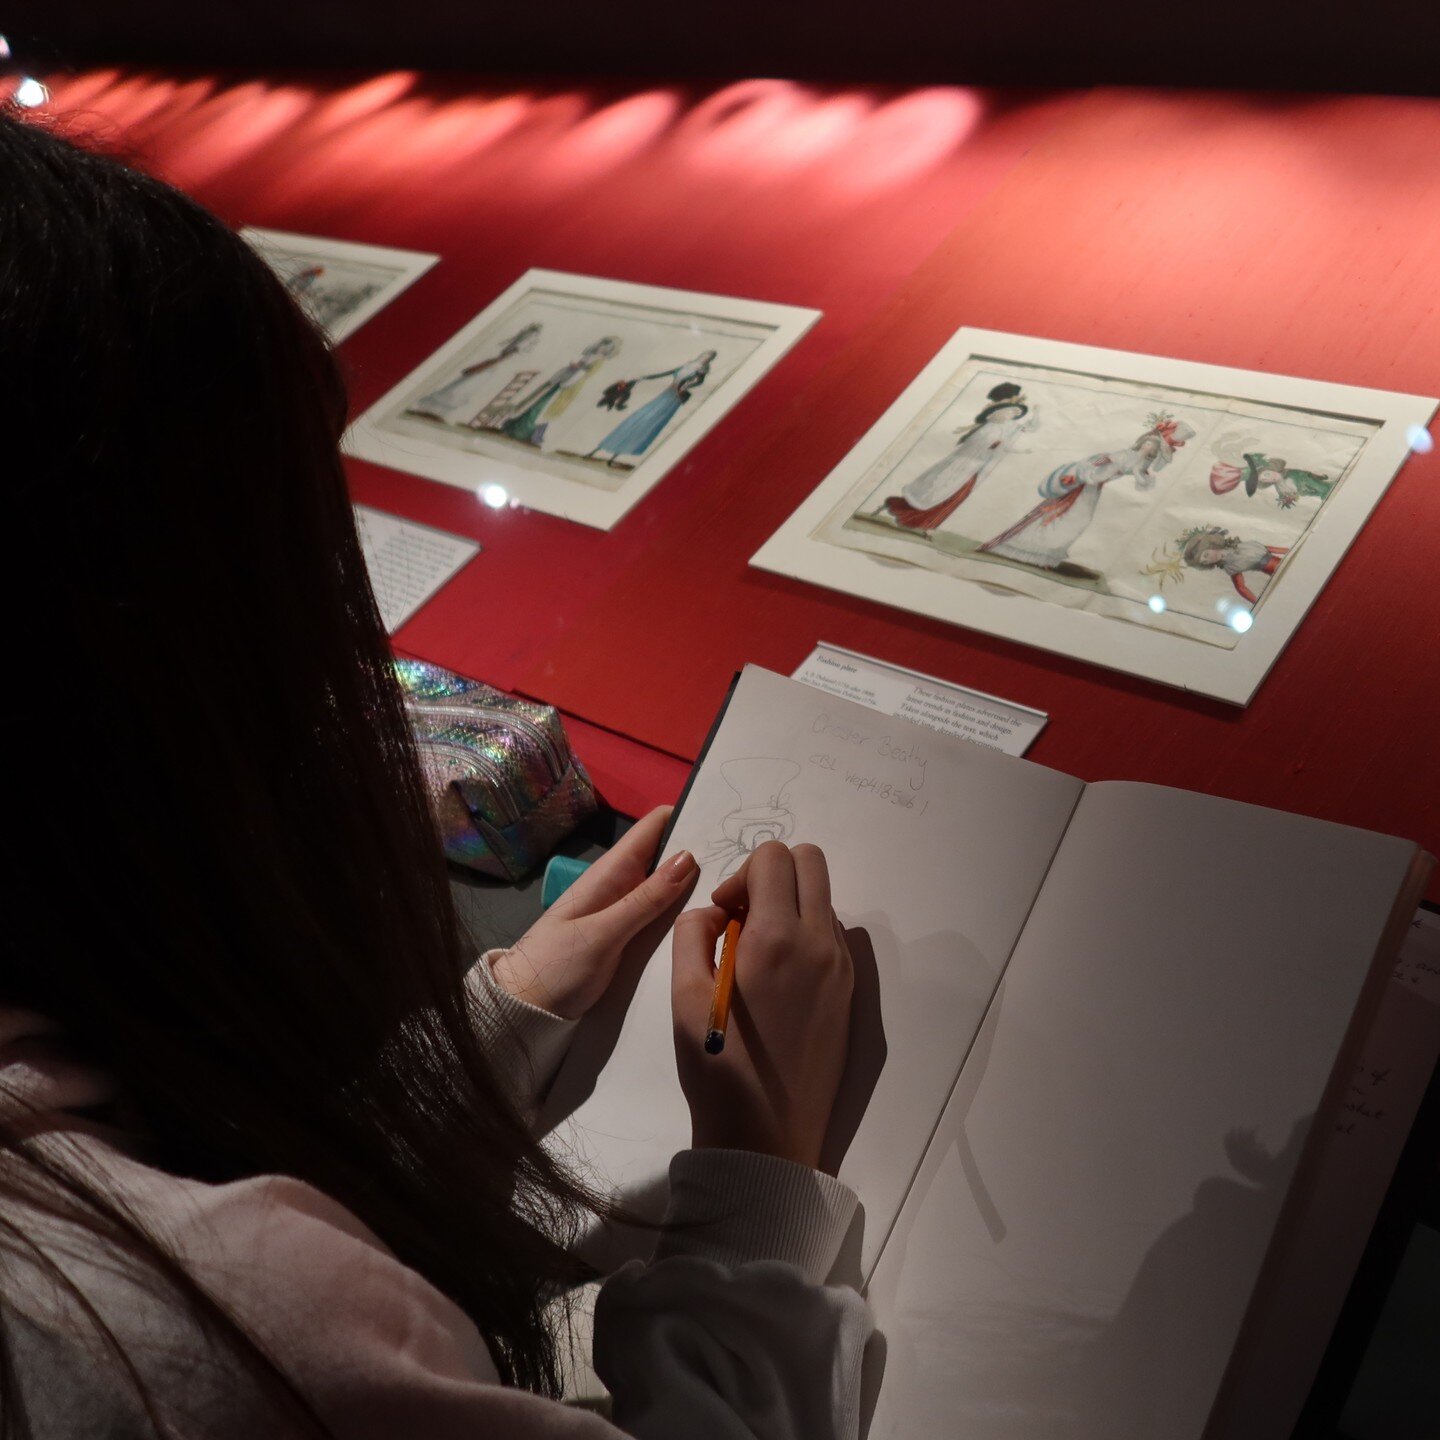 Huge thanks to the Chester Beatty Library for hosting our third year Art class today and giving us a brilliant insight into the collection #chesterbeattylibrary #artsofthebook